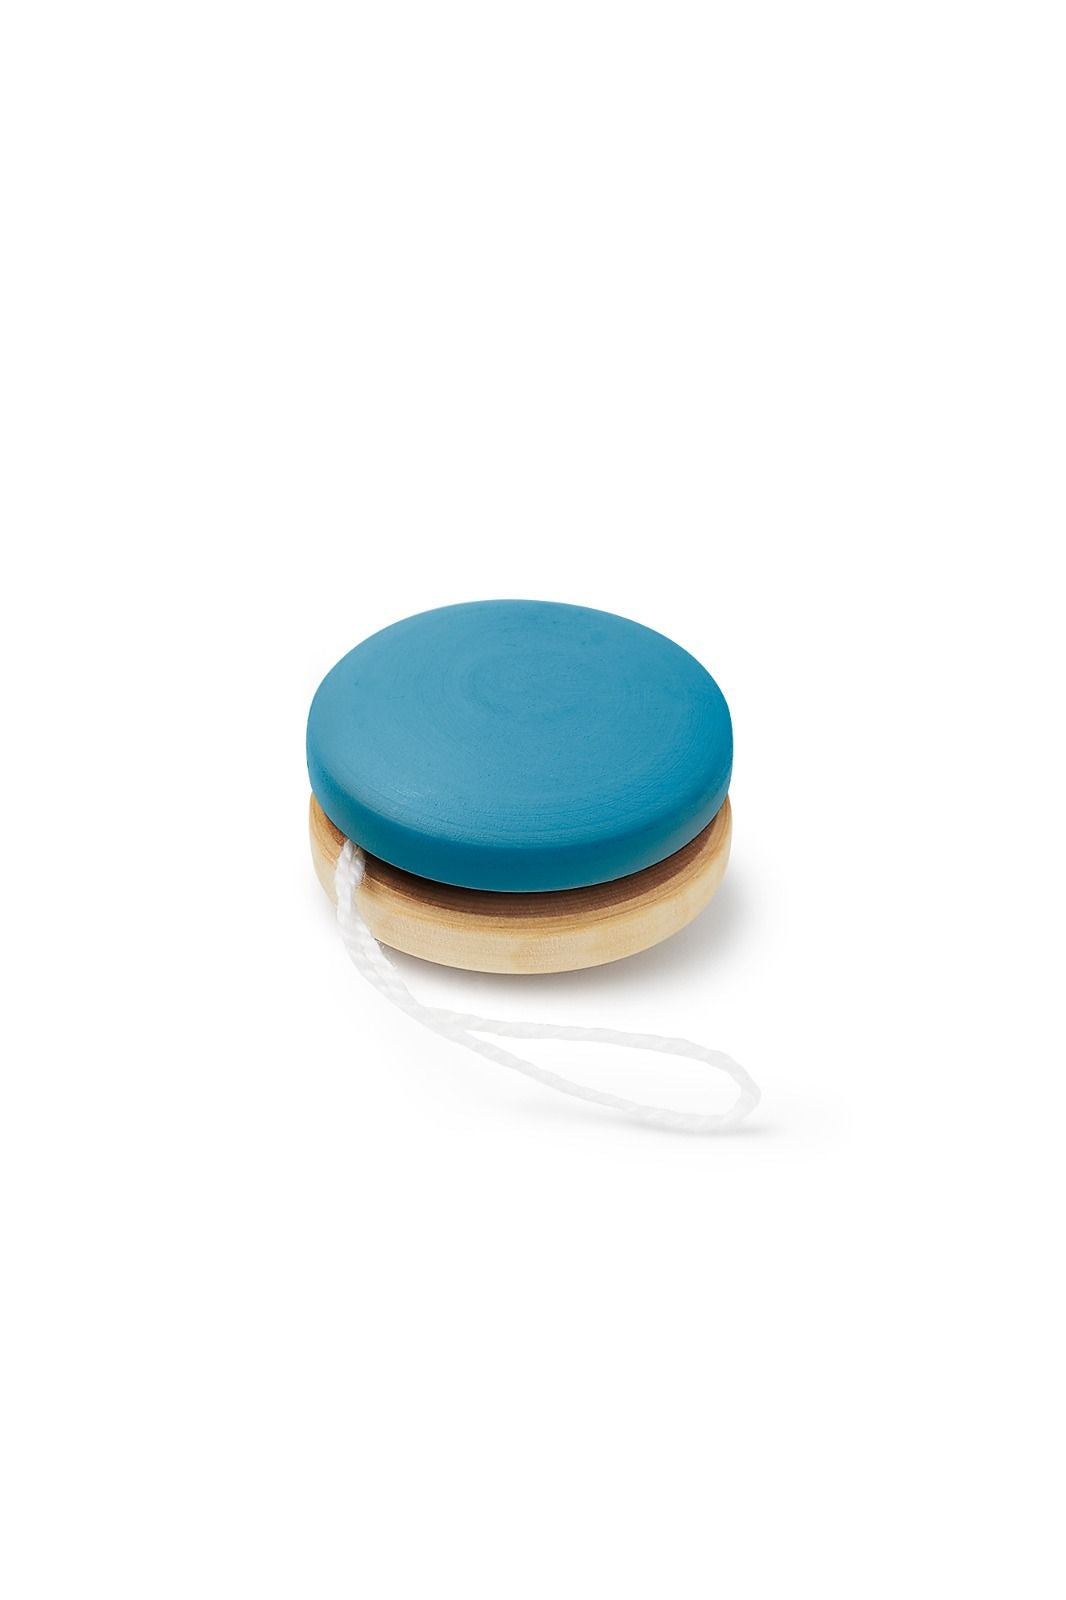 Mini Wooden YoYo - Blue - Eco-friendly and entertaining toy for sustainable and nostalgic play